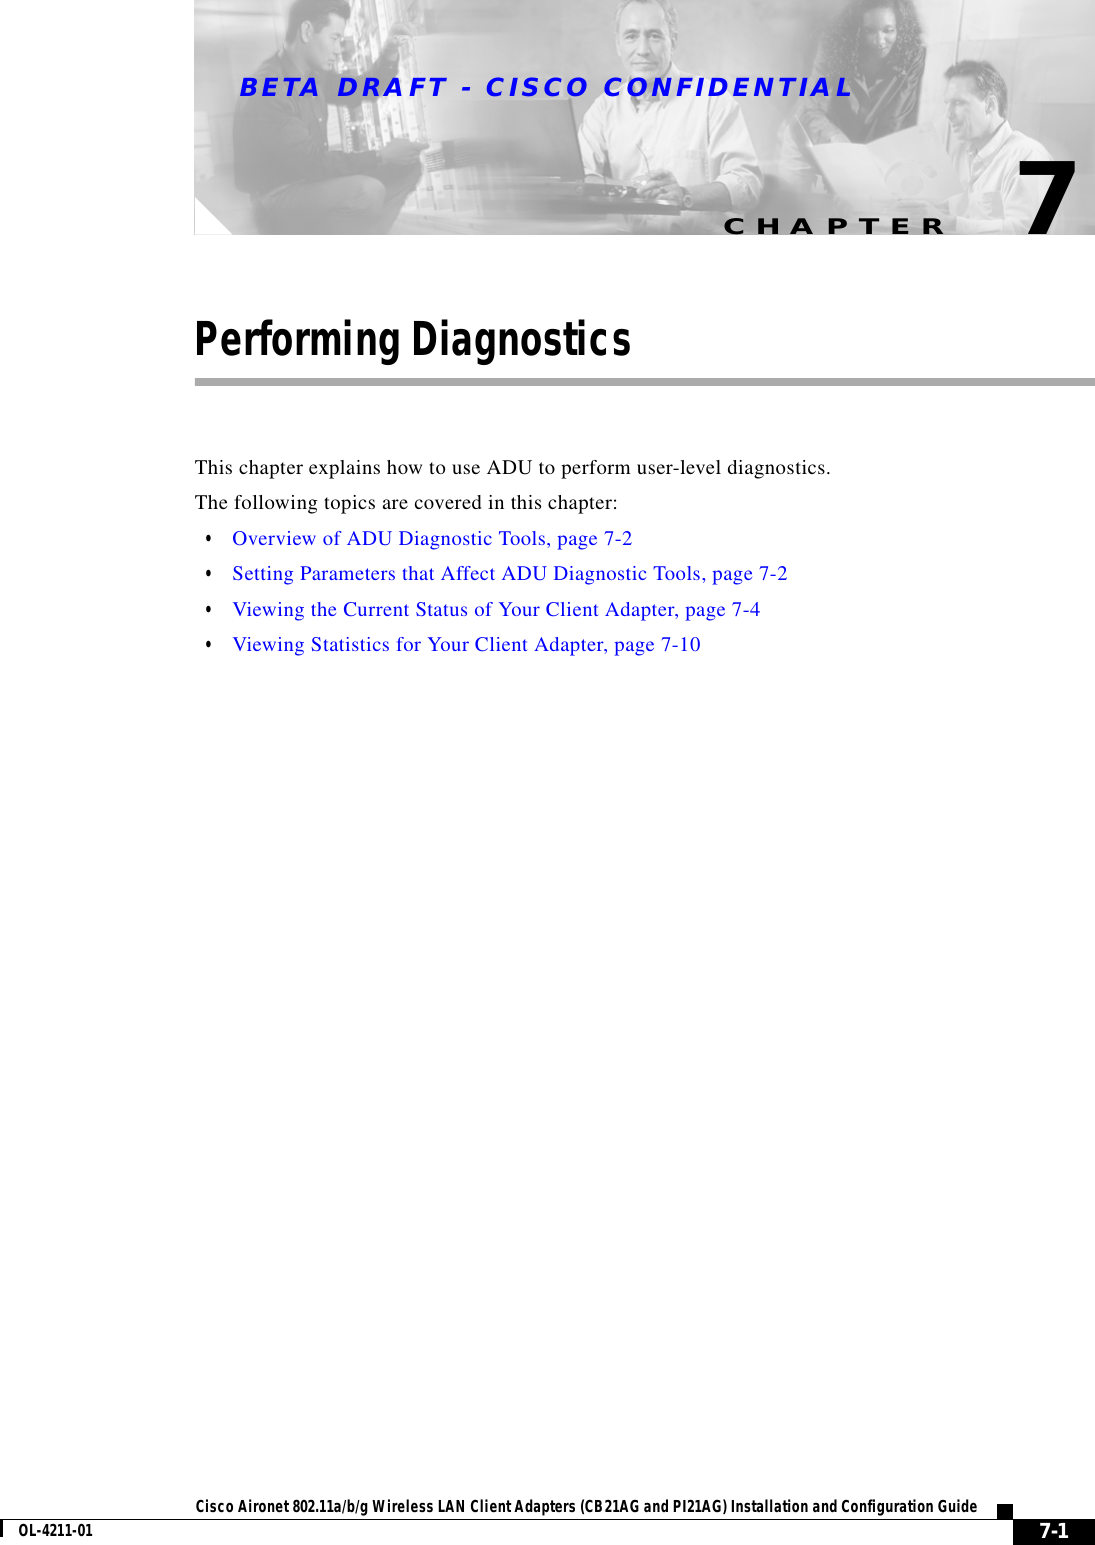 CHAPTERBETA DRAFT - CISCO CONFIDENTIAL7-1Cisco Aironet 802.11a/b/g Wireless LAN Client Adapters (CB21AG and PI21AG) Installation and Configuration GuideOL-4211-017Performing DiagnosticsThis chapter explains how to use ADU to perform user-level diagnostics.The following topics are covered in this chapter:•Overview of ADU Diagnostic Tools, page 7-2•Setting Parameters that Affect ADU Diagnostic Tools, page 7-2•Viewing the Current Status of Your Client Adapter, page 7-4•Viewing Statistics for Your Client Adapter, page 7-10